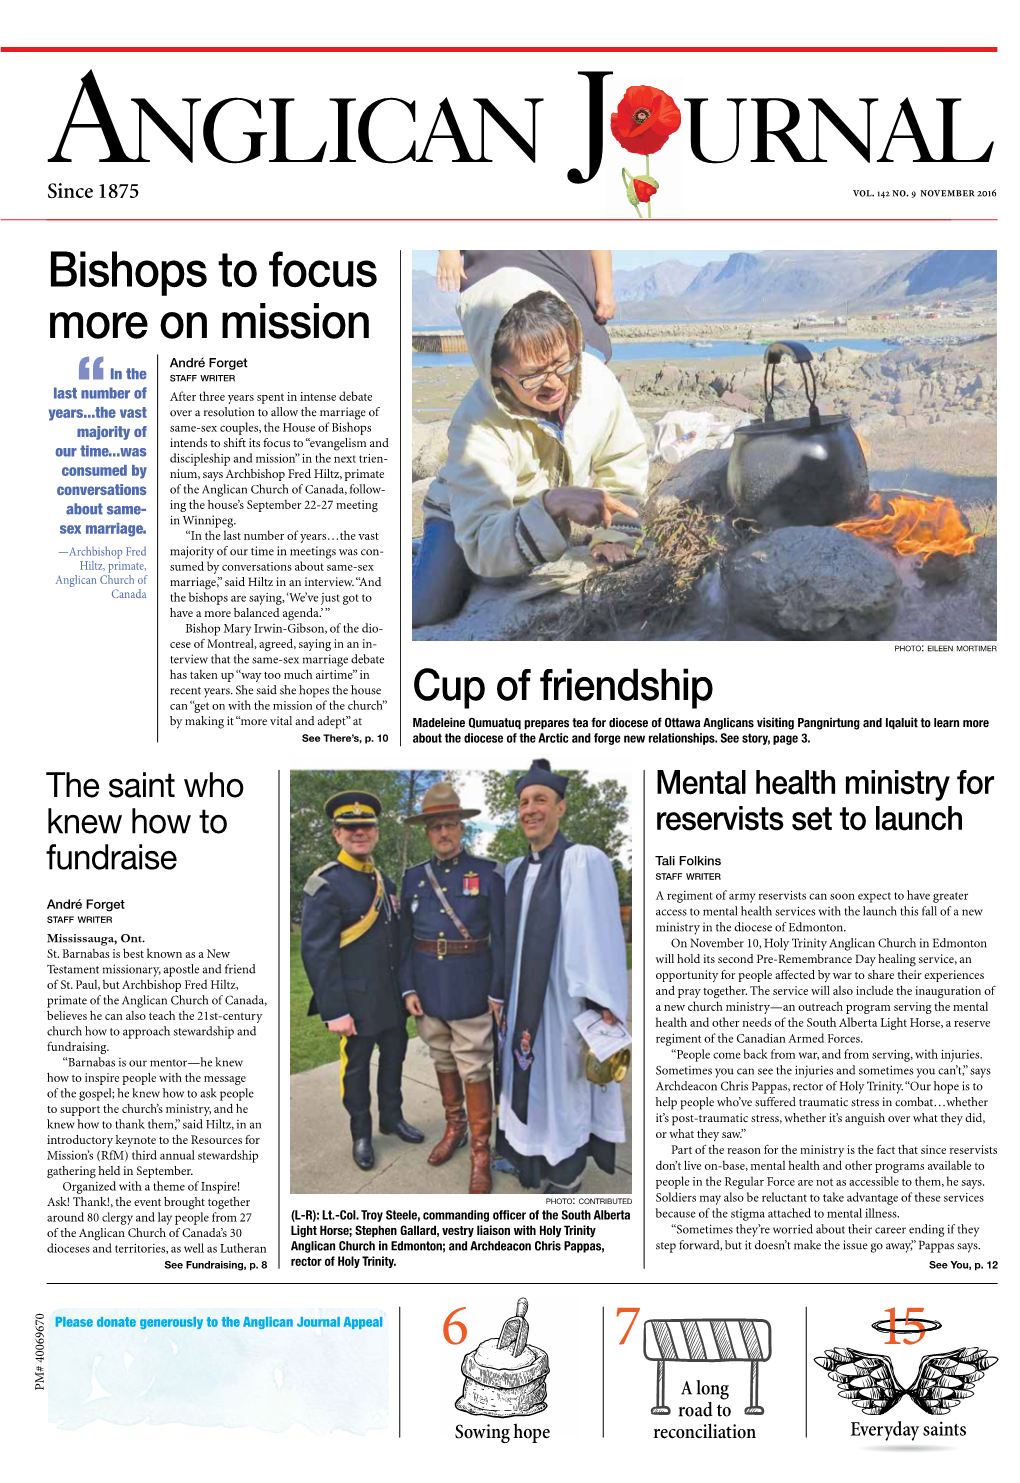 Bishops to Focus More on Mission